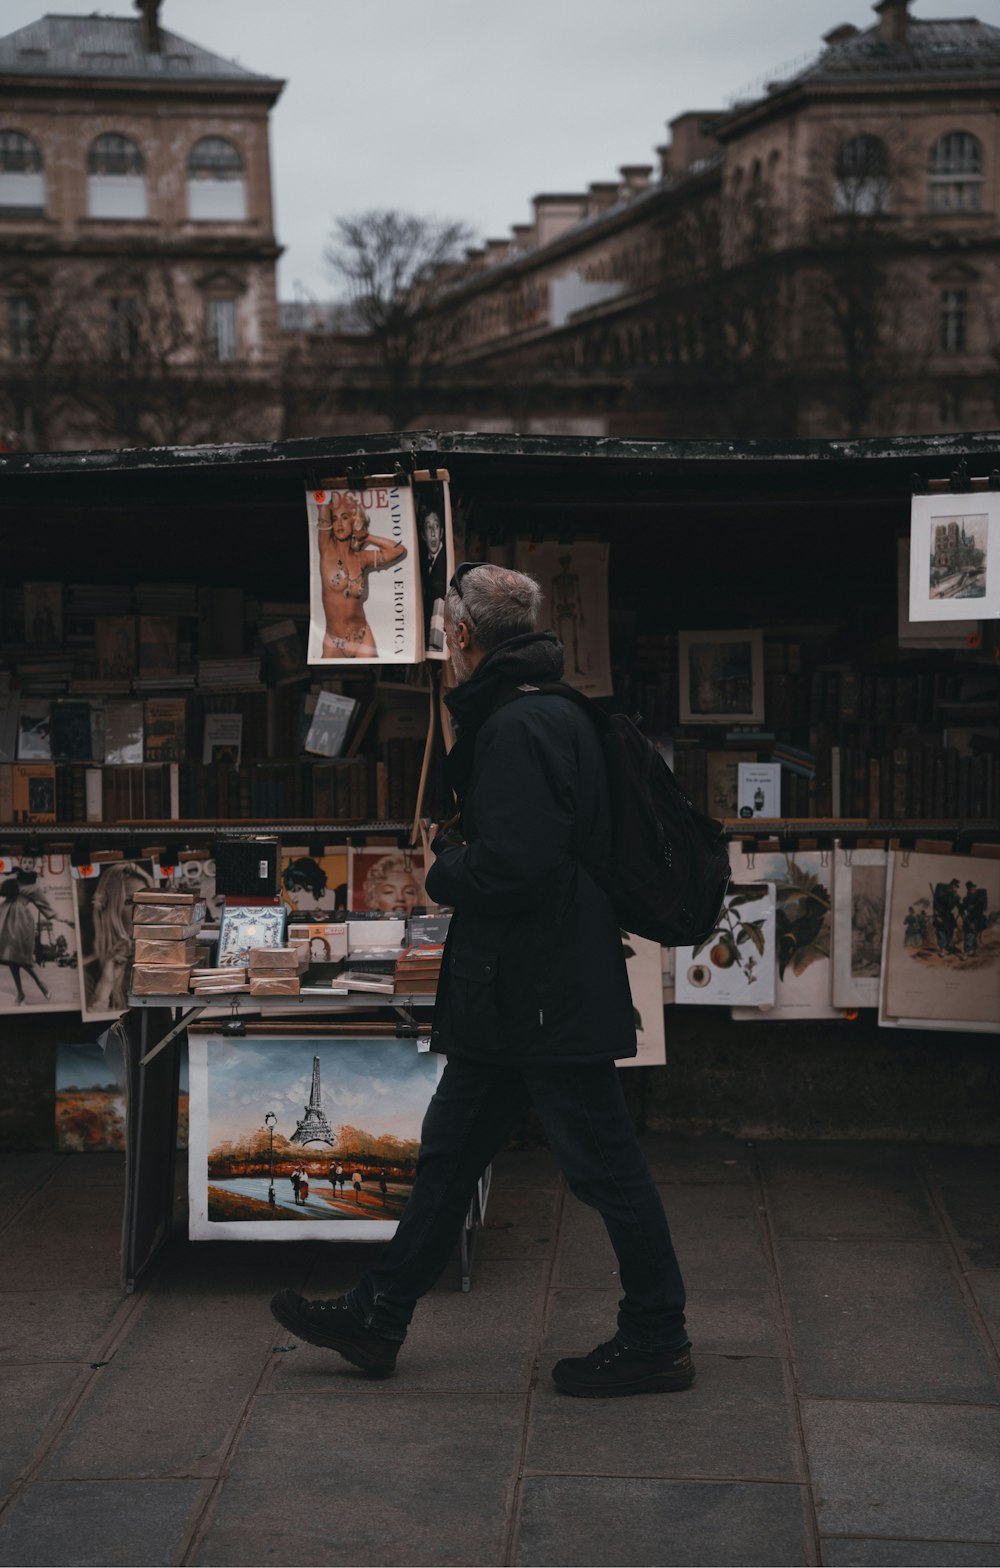 a man is walking past a book stand